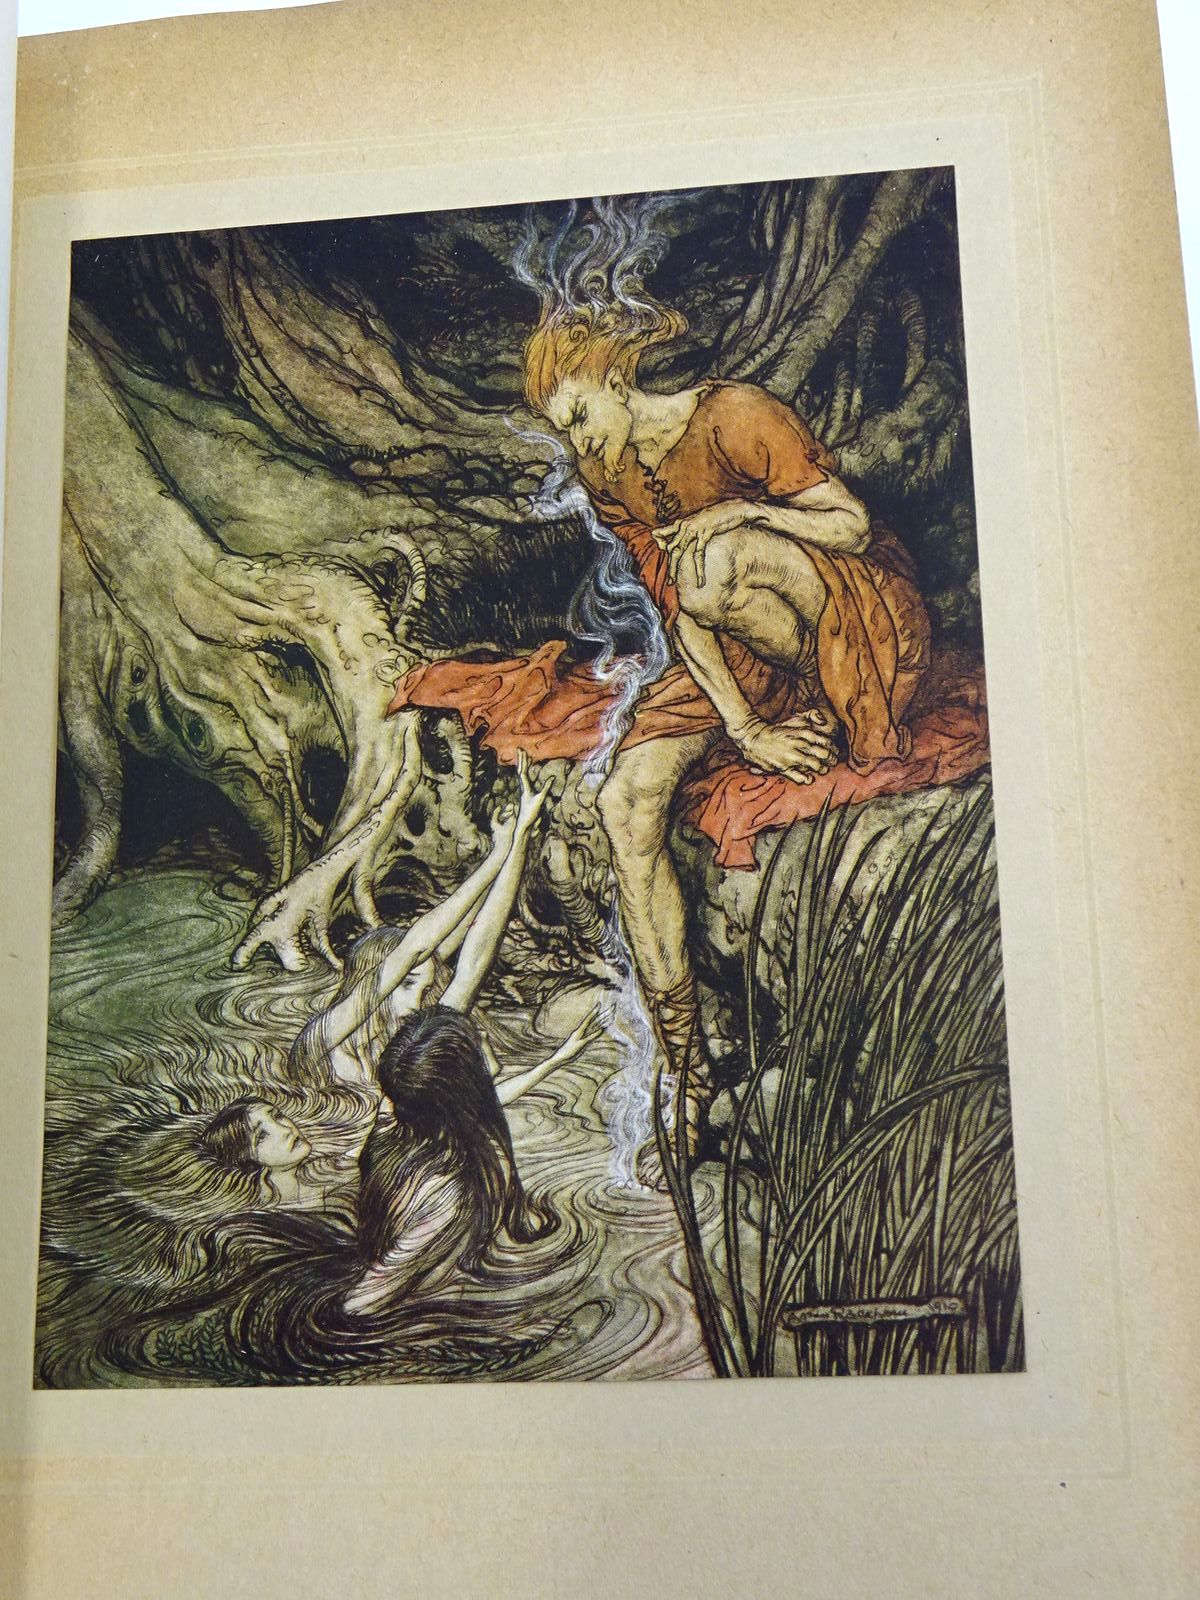 Photo of THE RHINEGOLD & THE VALKYRIE written by Wagner, Richard
Armour, Margaret illustrated by Rackham, Arthur published by William Heinemann (STOCK CODE: 1318101)  for sale by Stella & Rose's Books